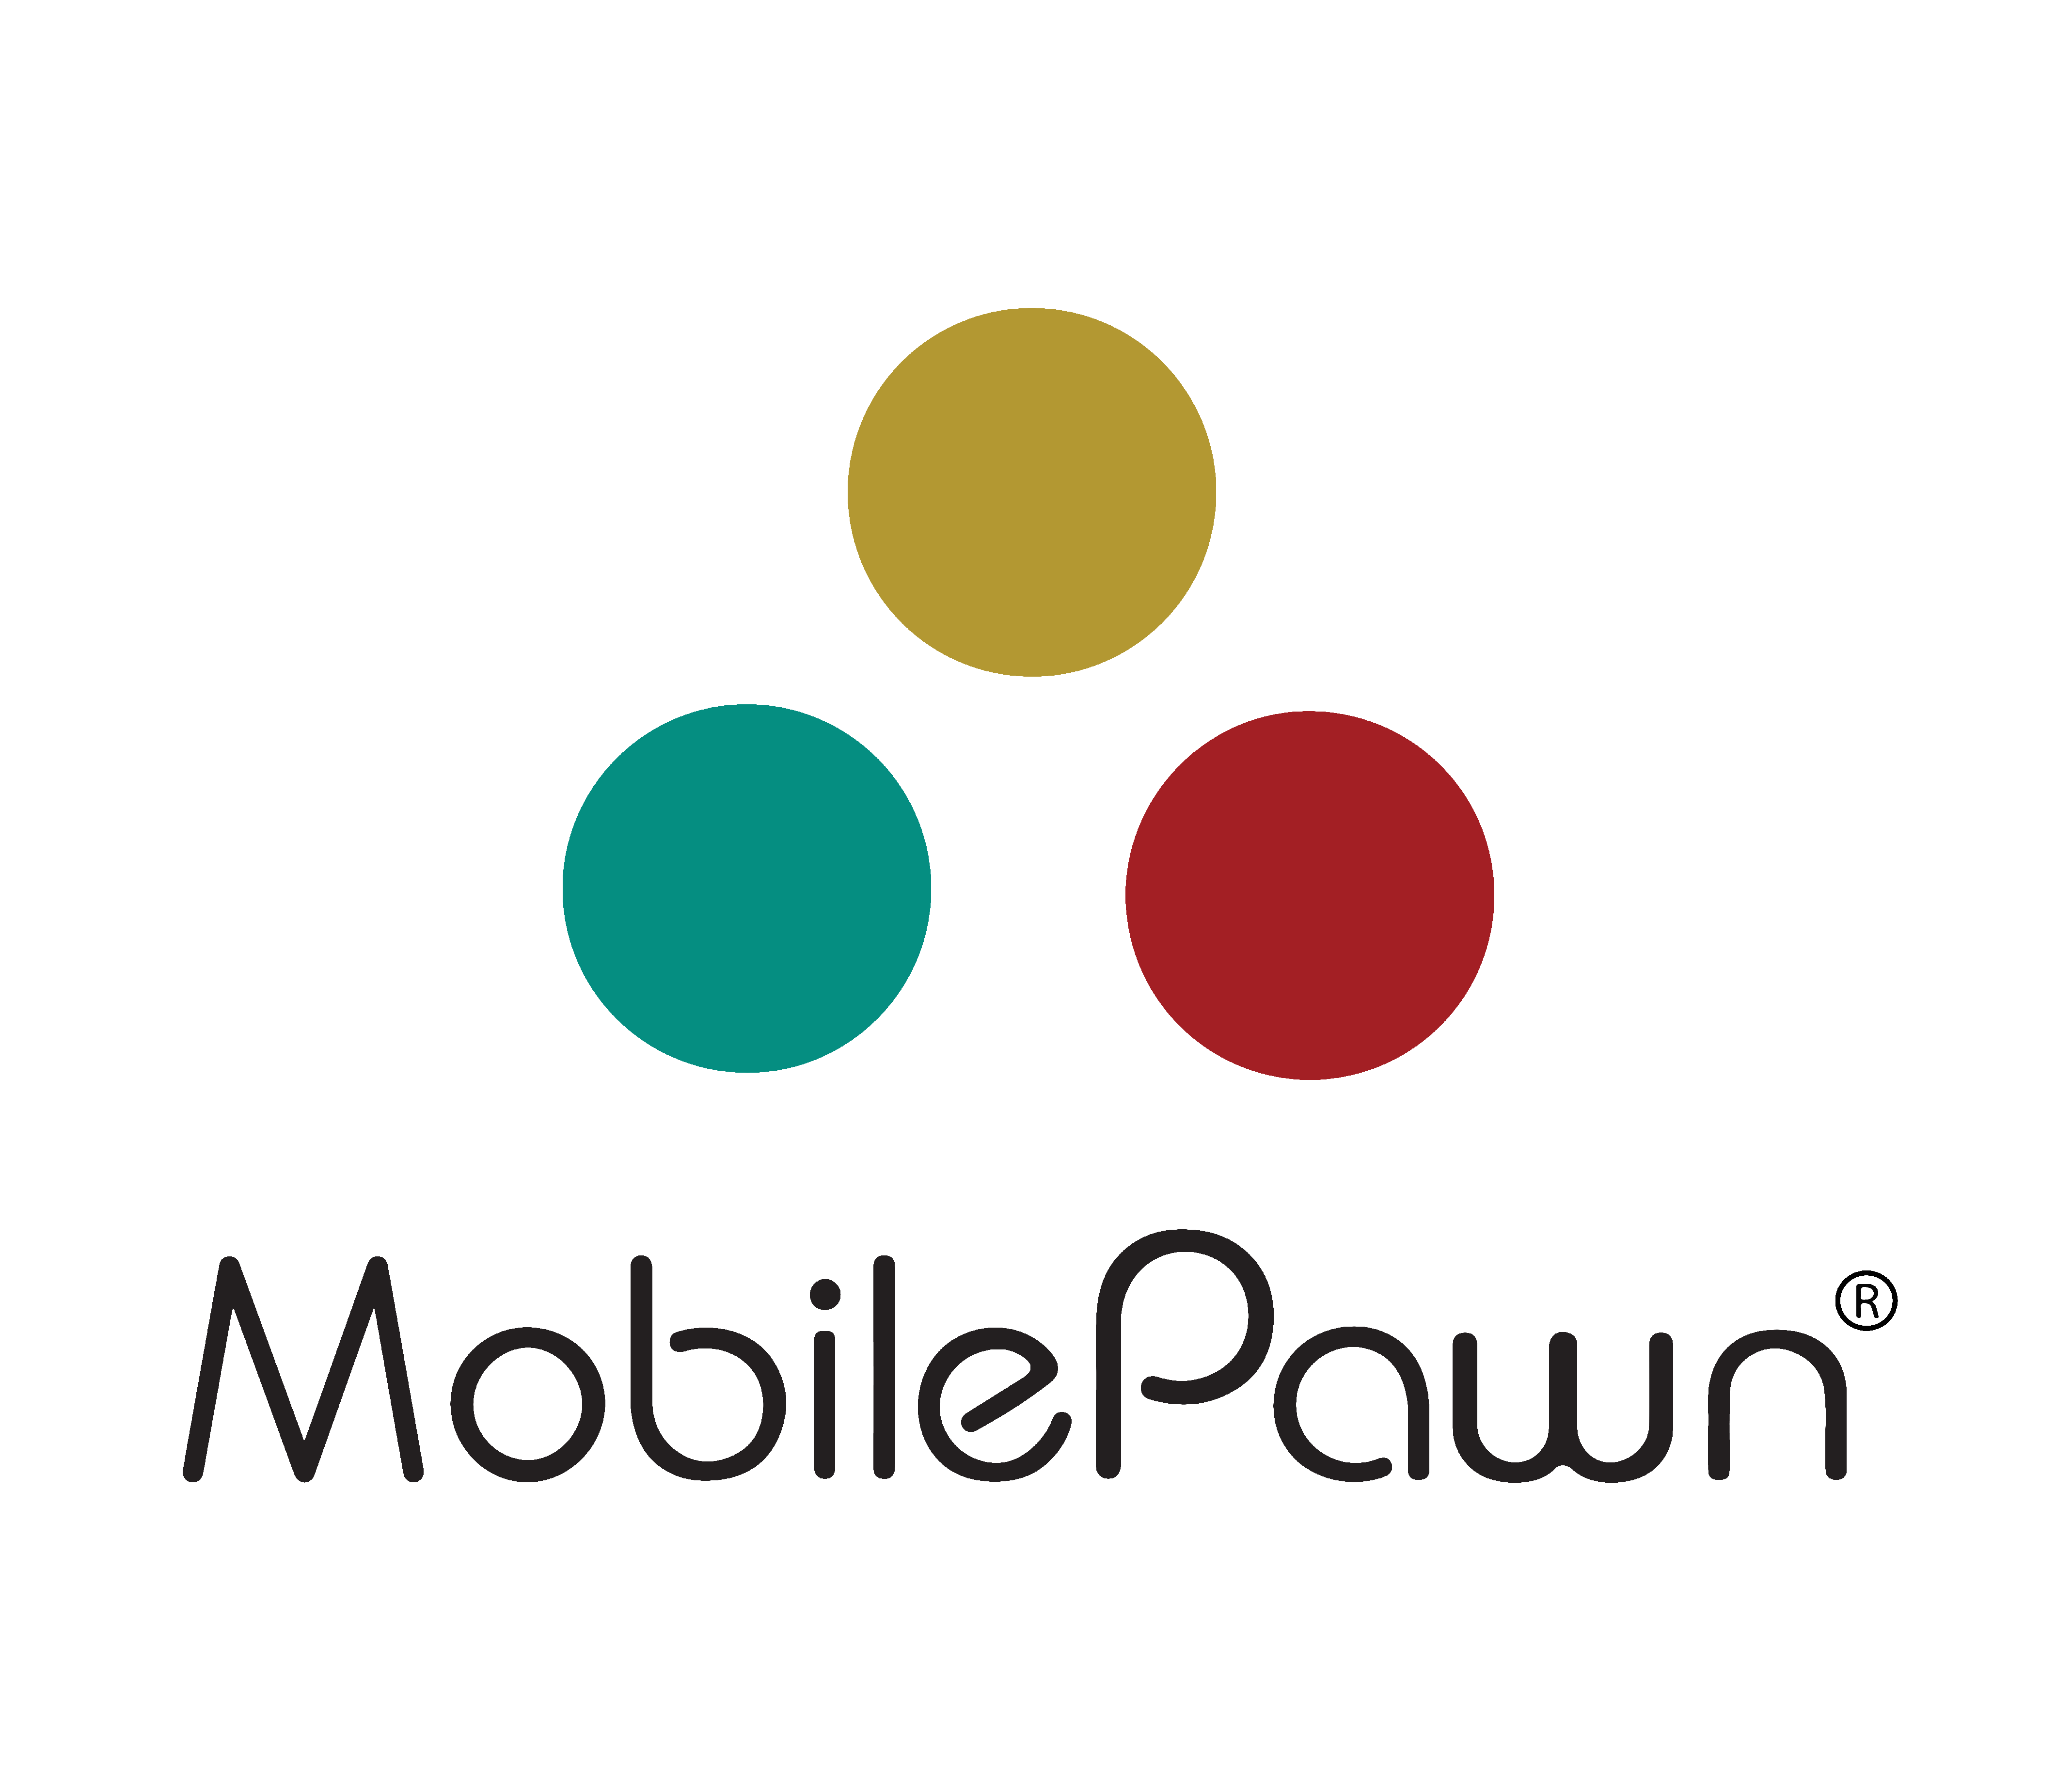 Mobile Pawn App - Best Value Pawn